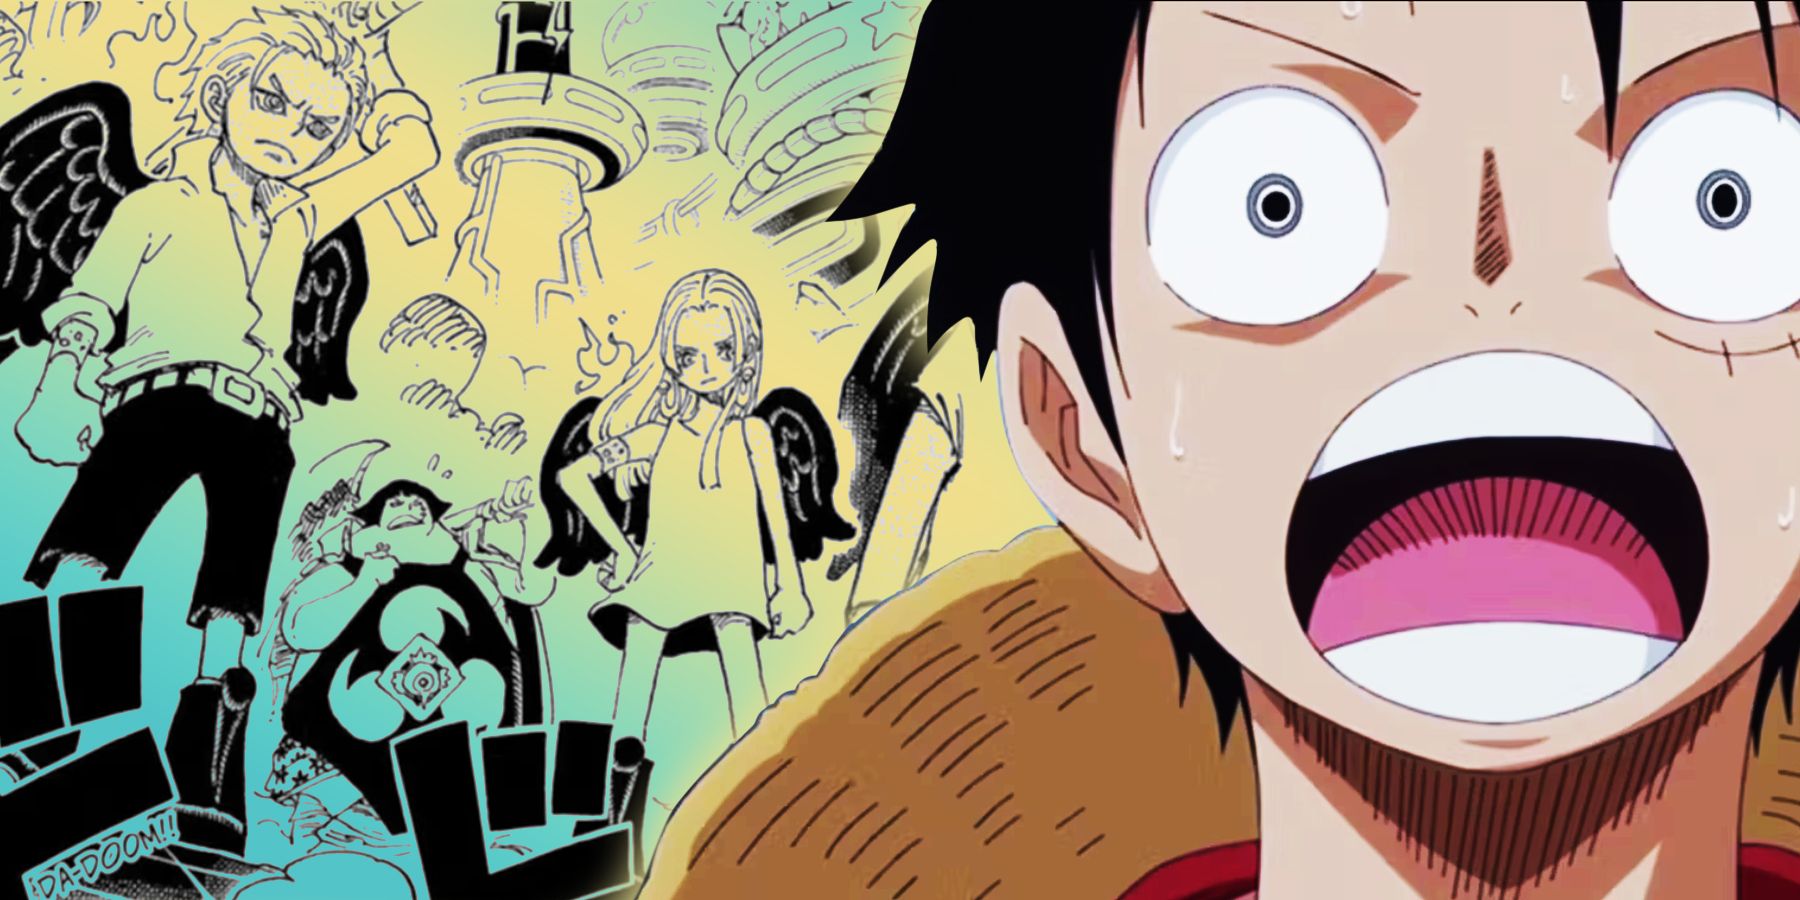 Powerscaling One Piece 1078: Straw Hat Pirates and CP0 vs the Seraphim